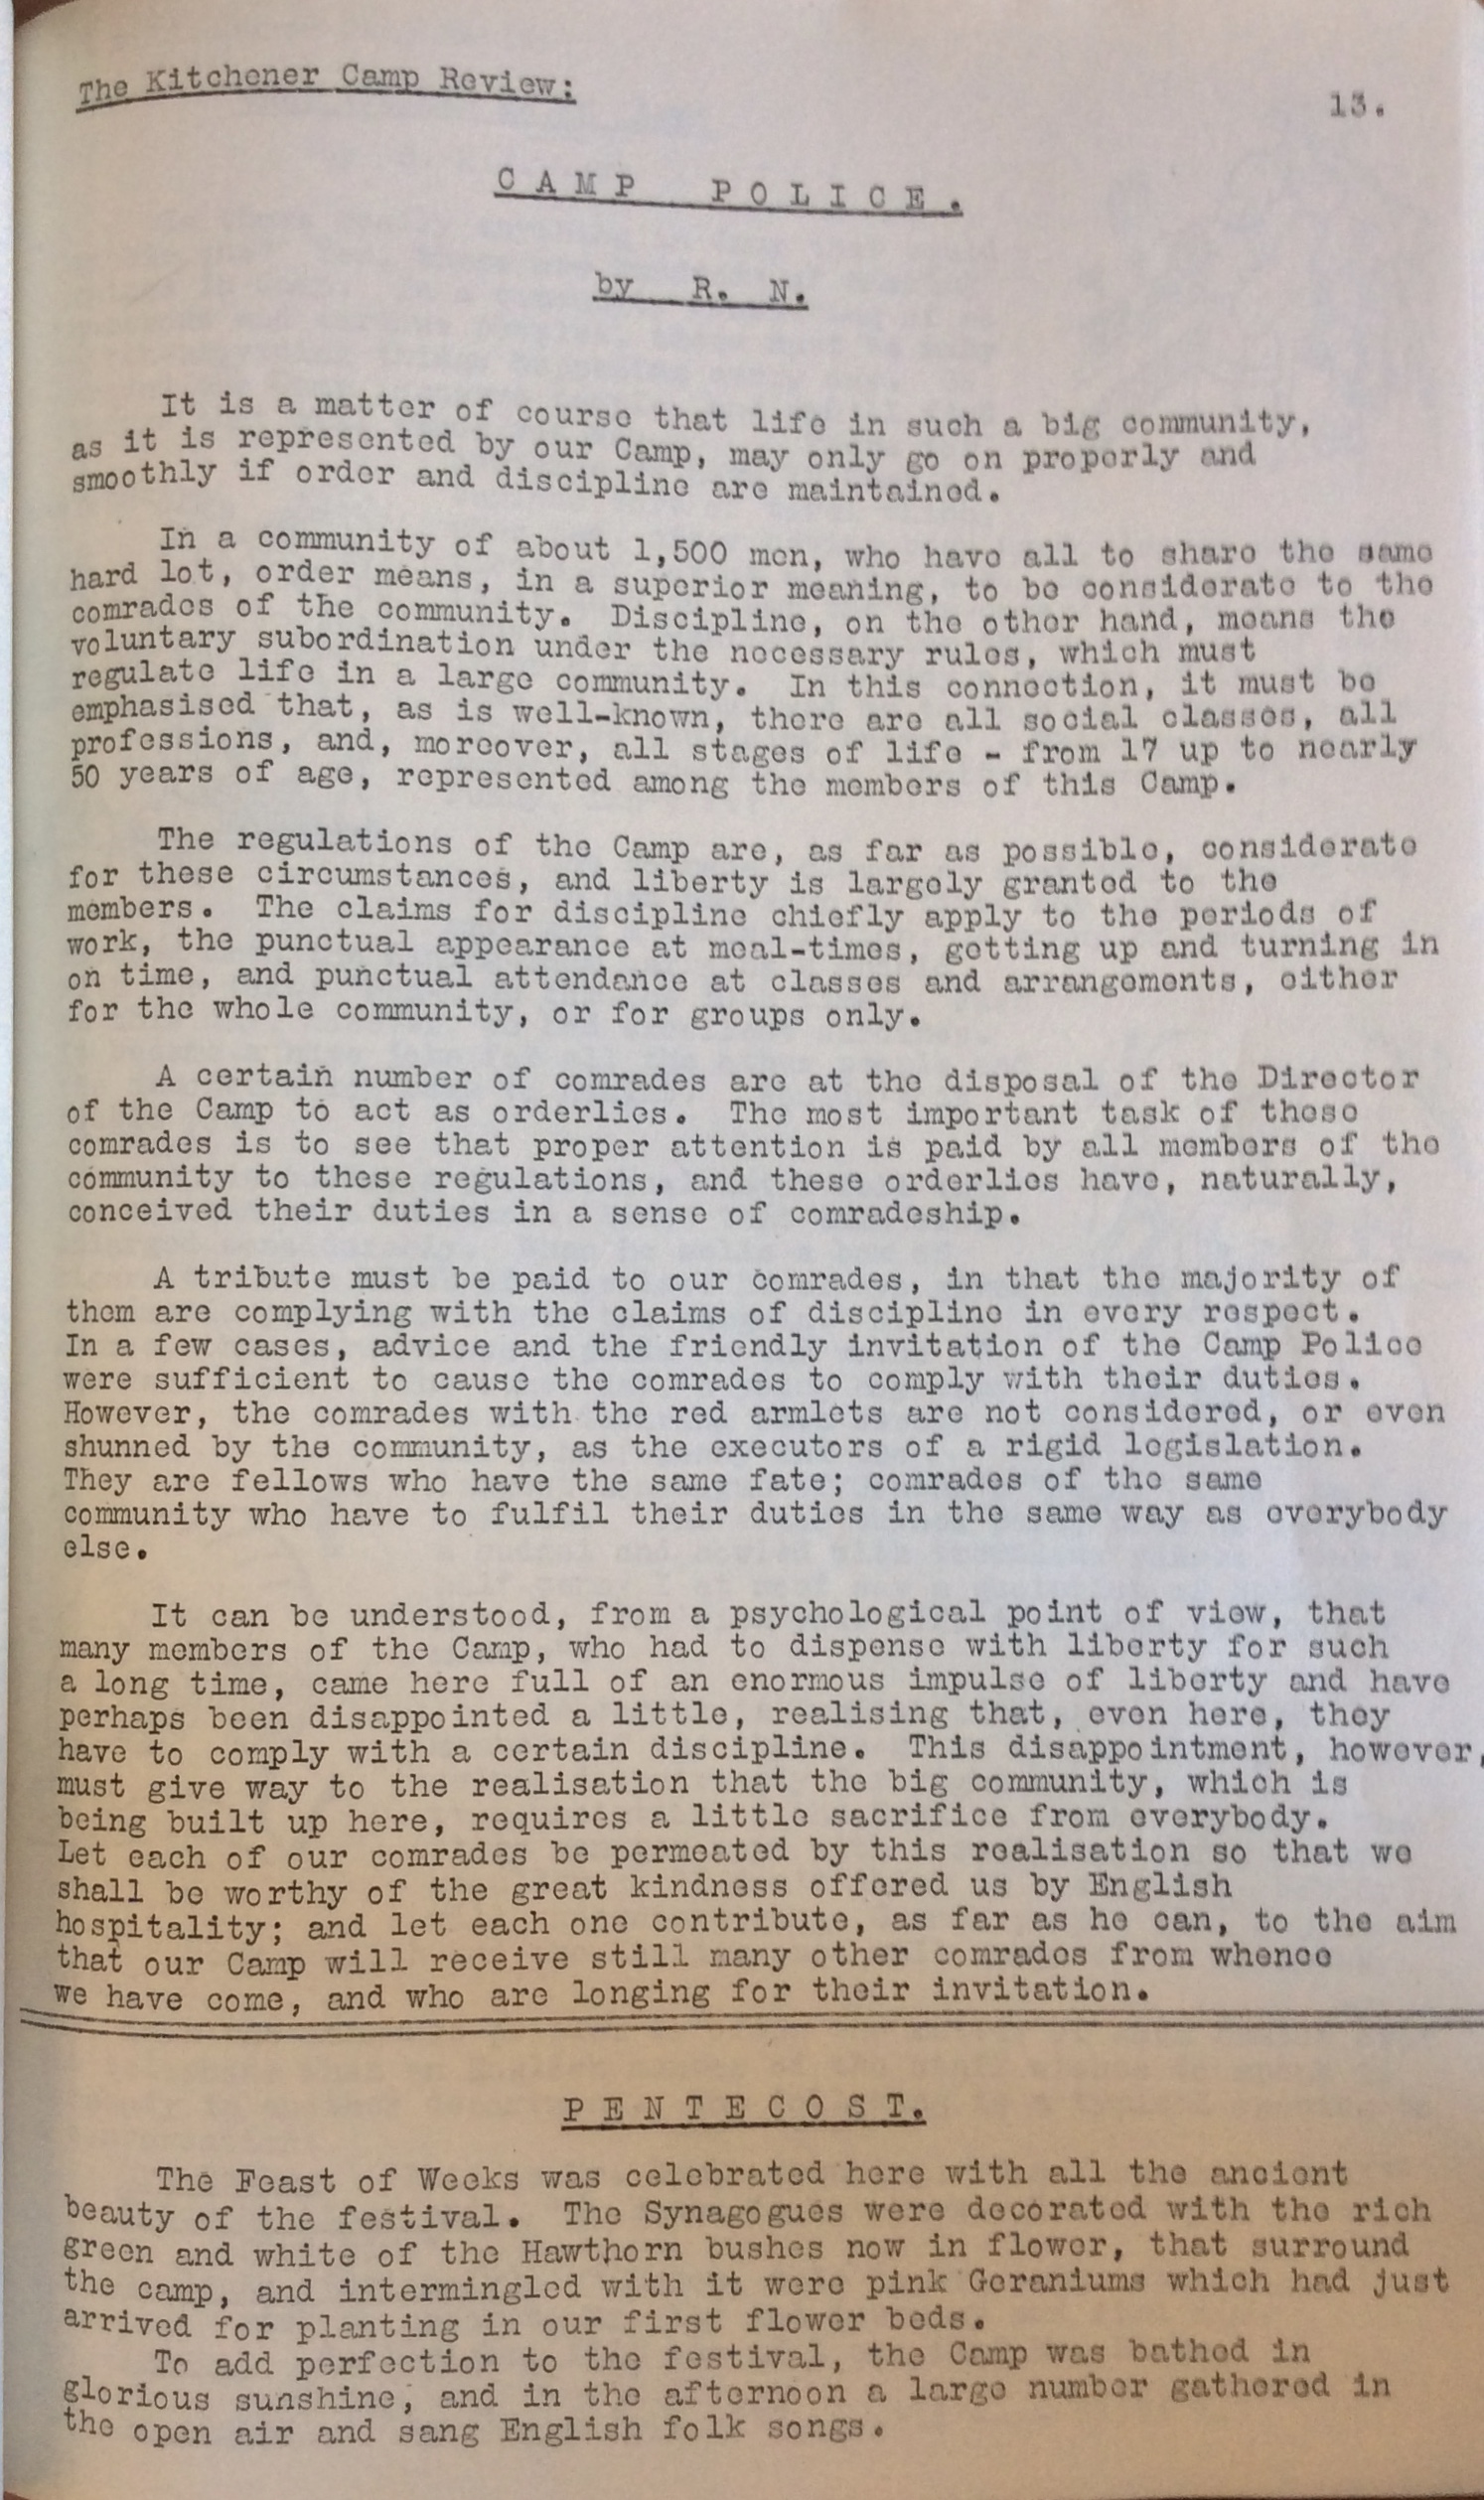 Kitchener Camp Review, June 1939, page 13